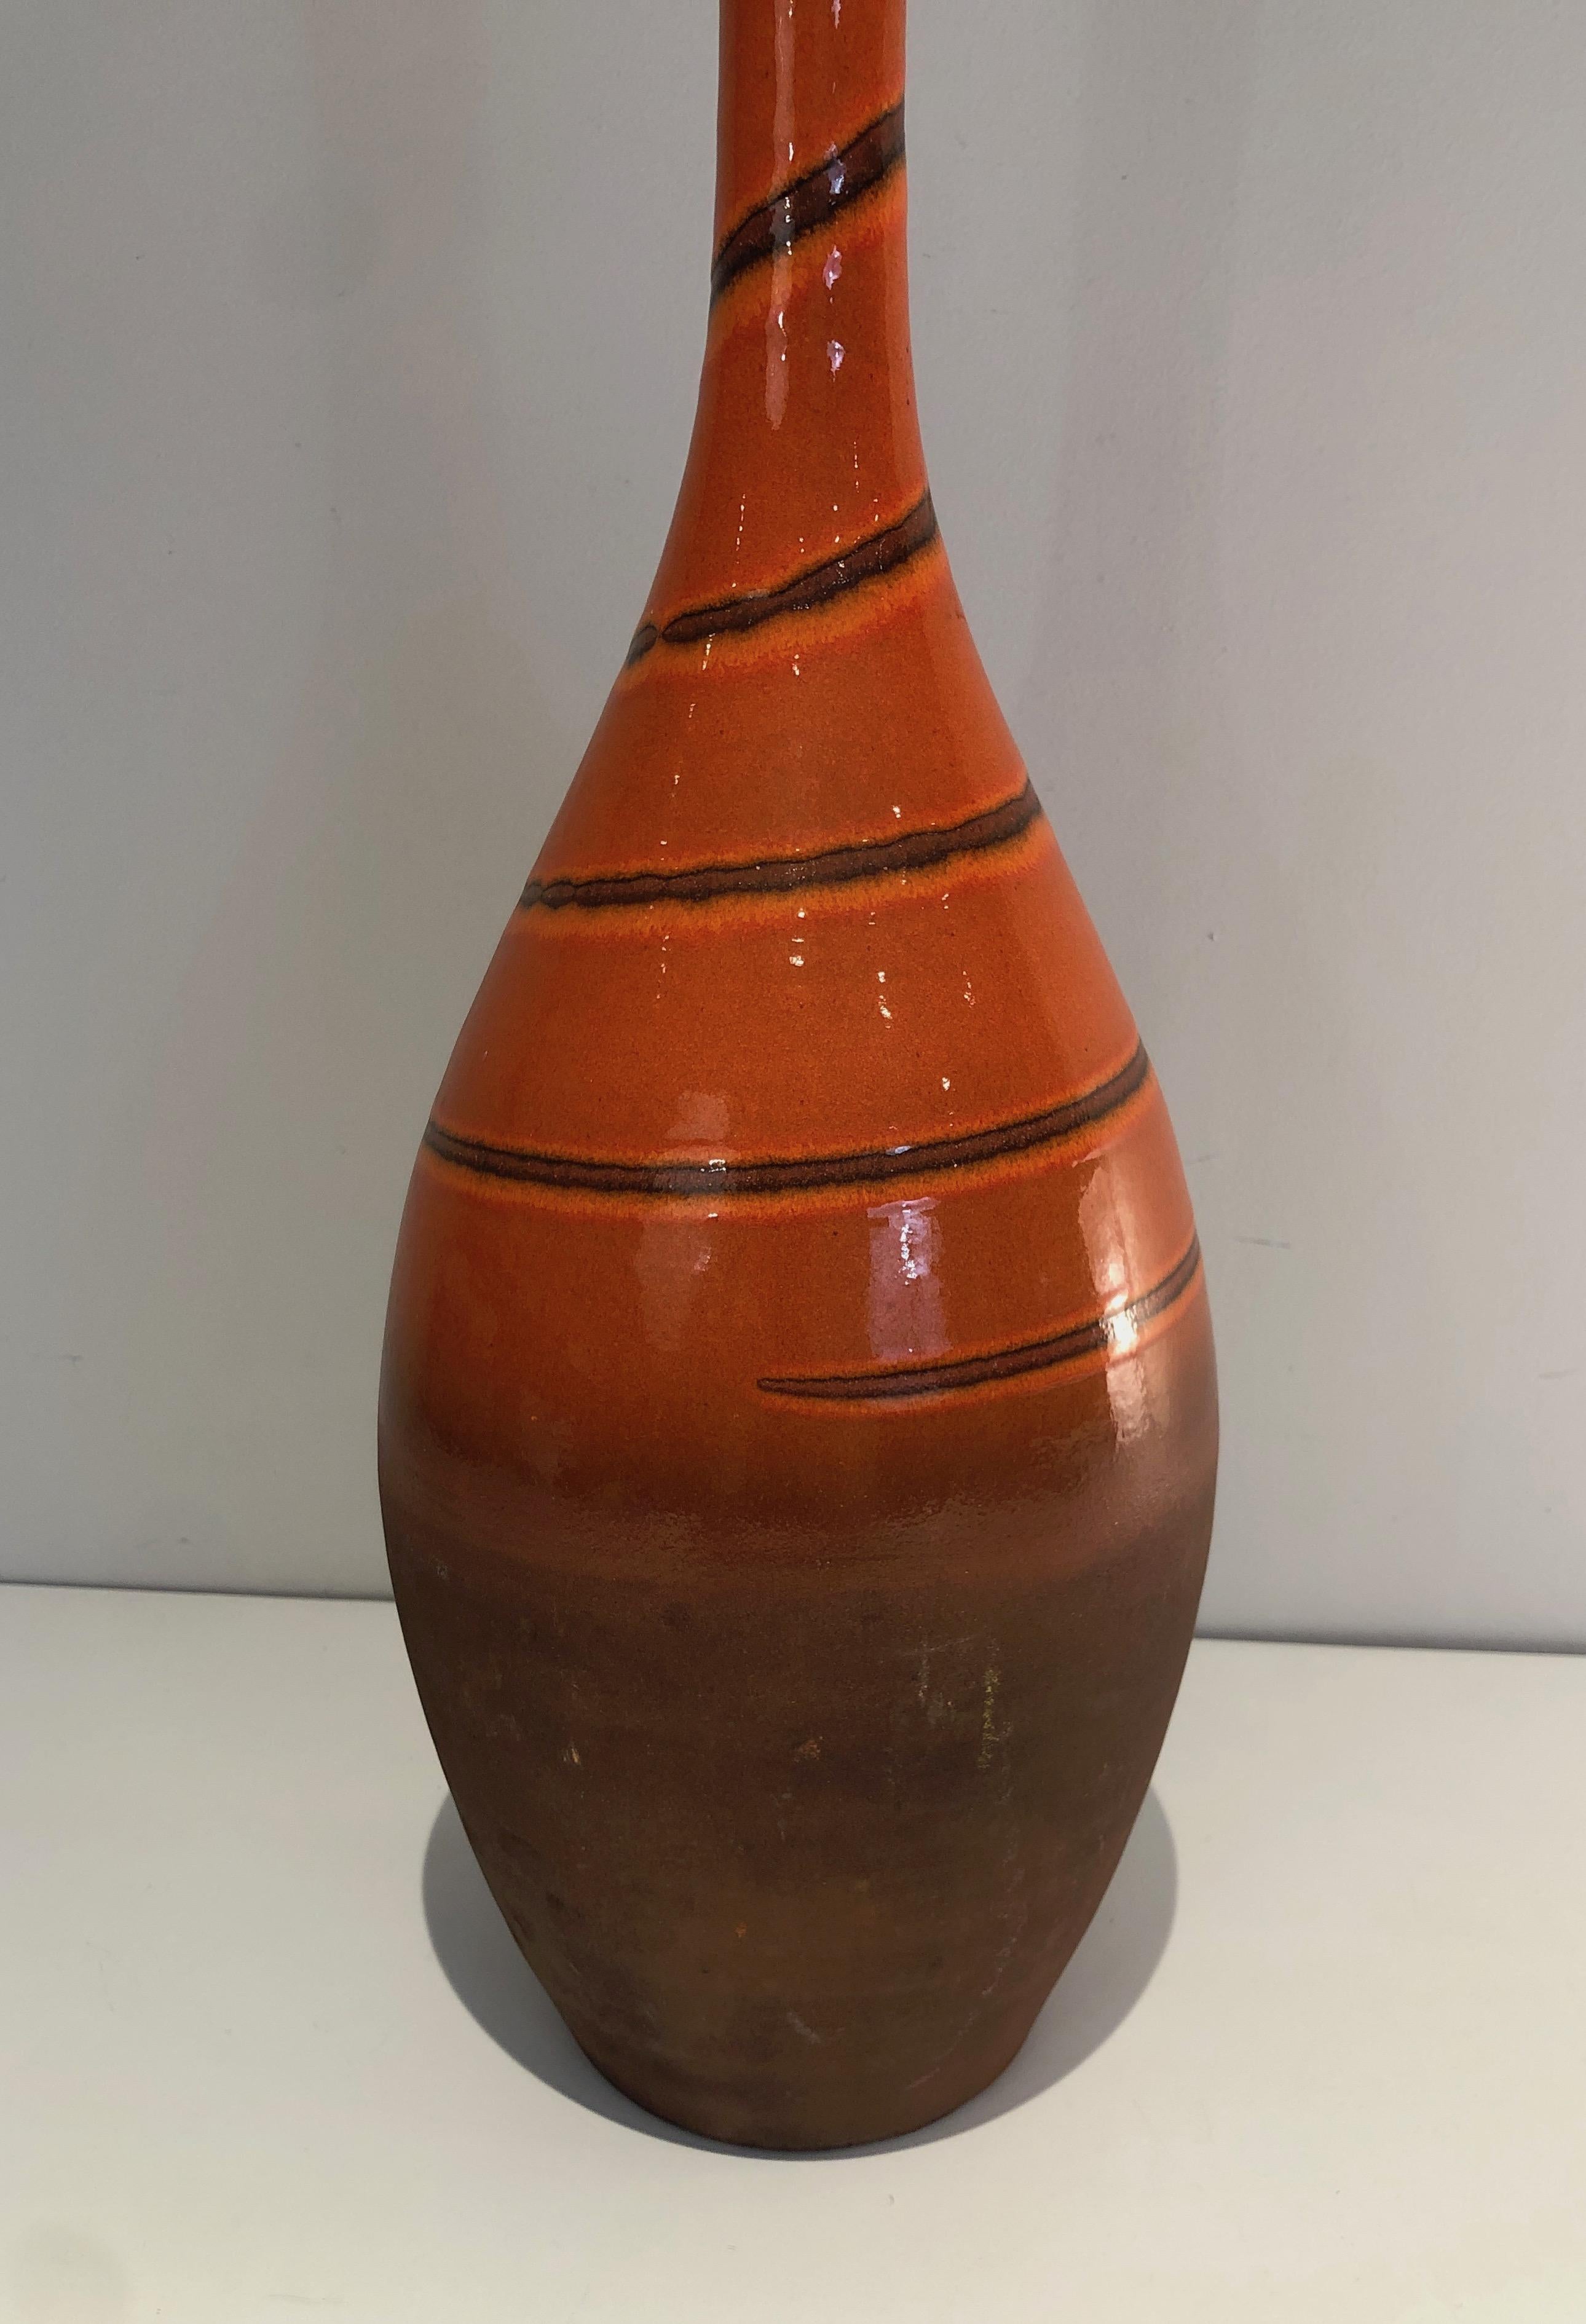 Tall Ceramic Vase in the Red-Orange Tones, French Work, Circa 1950 For Sale 3